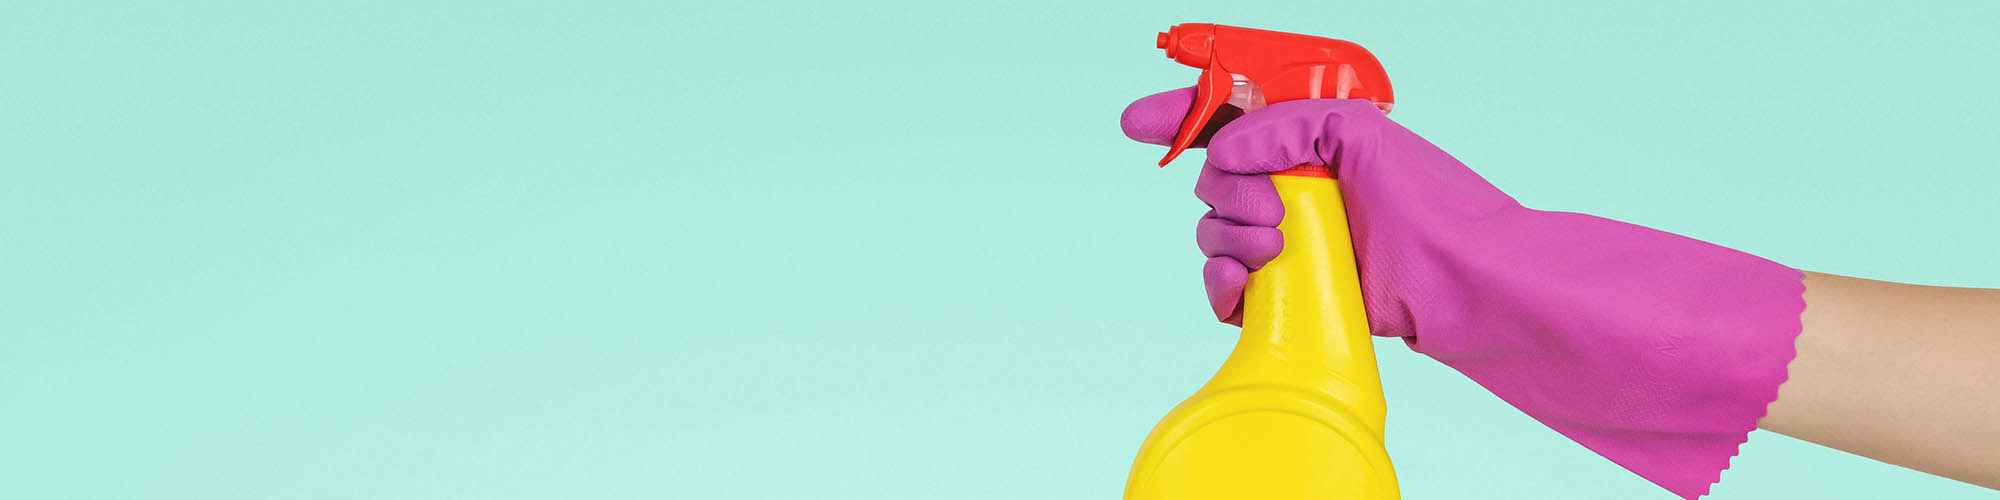 Pink Glove with Yellow Spray Bottle